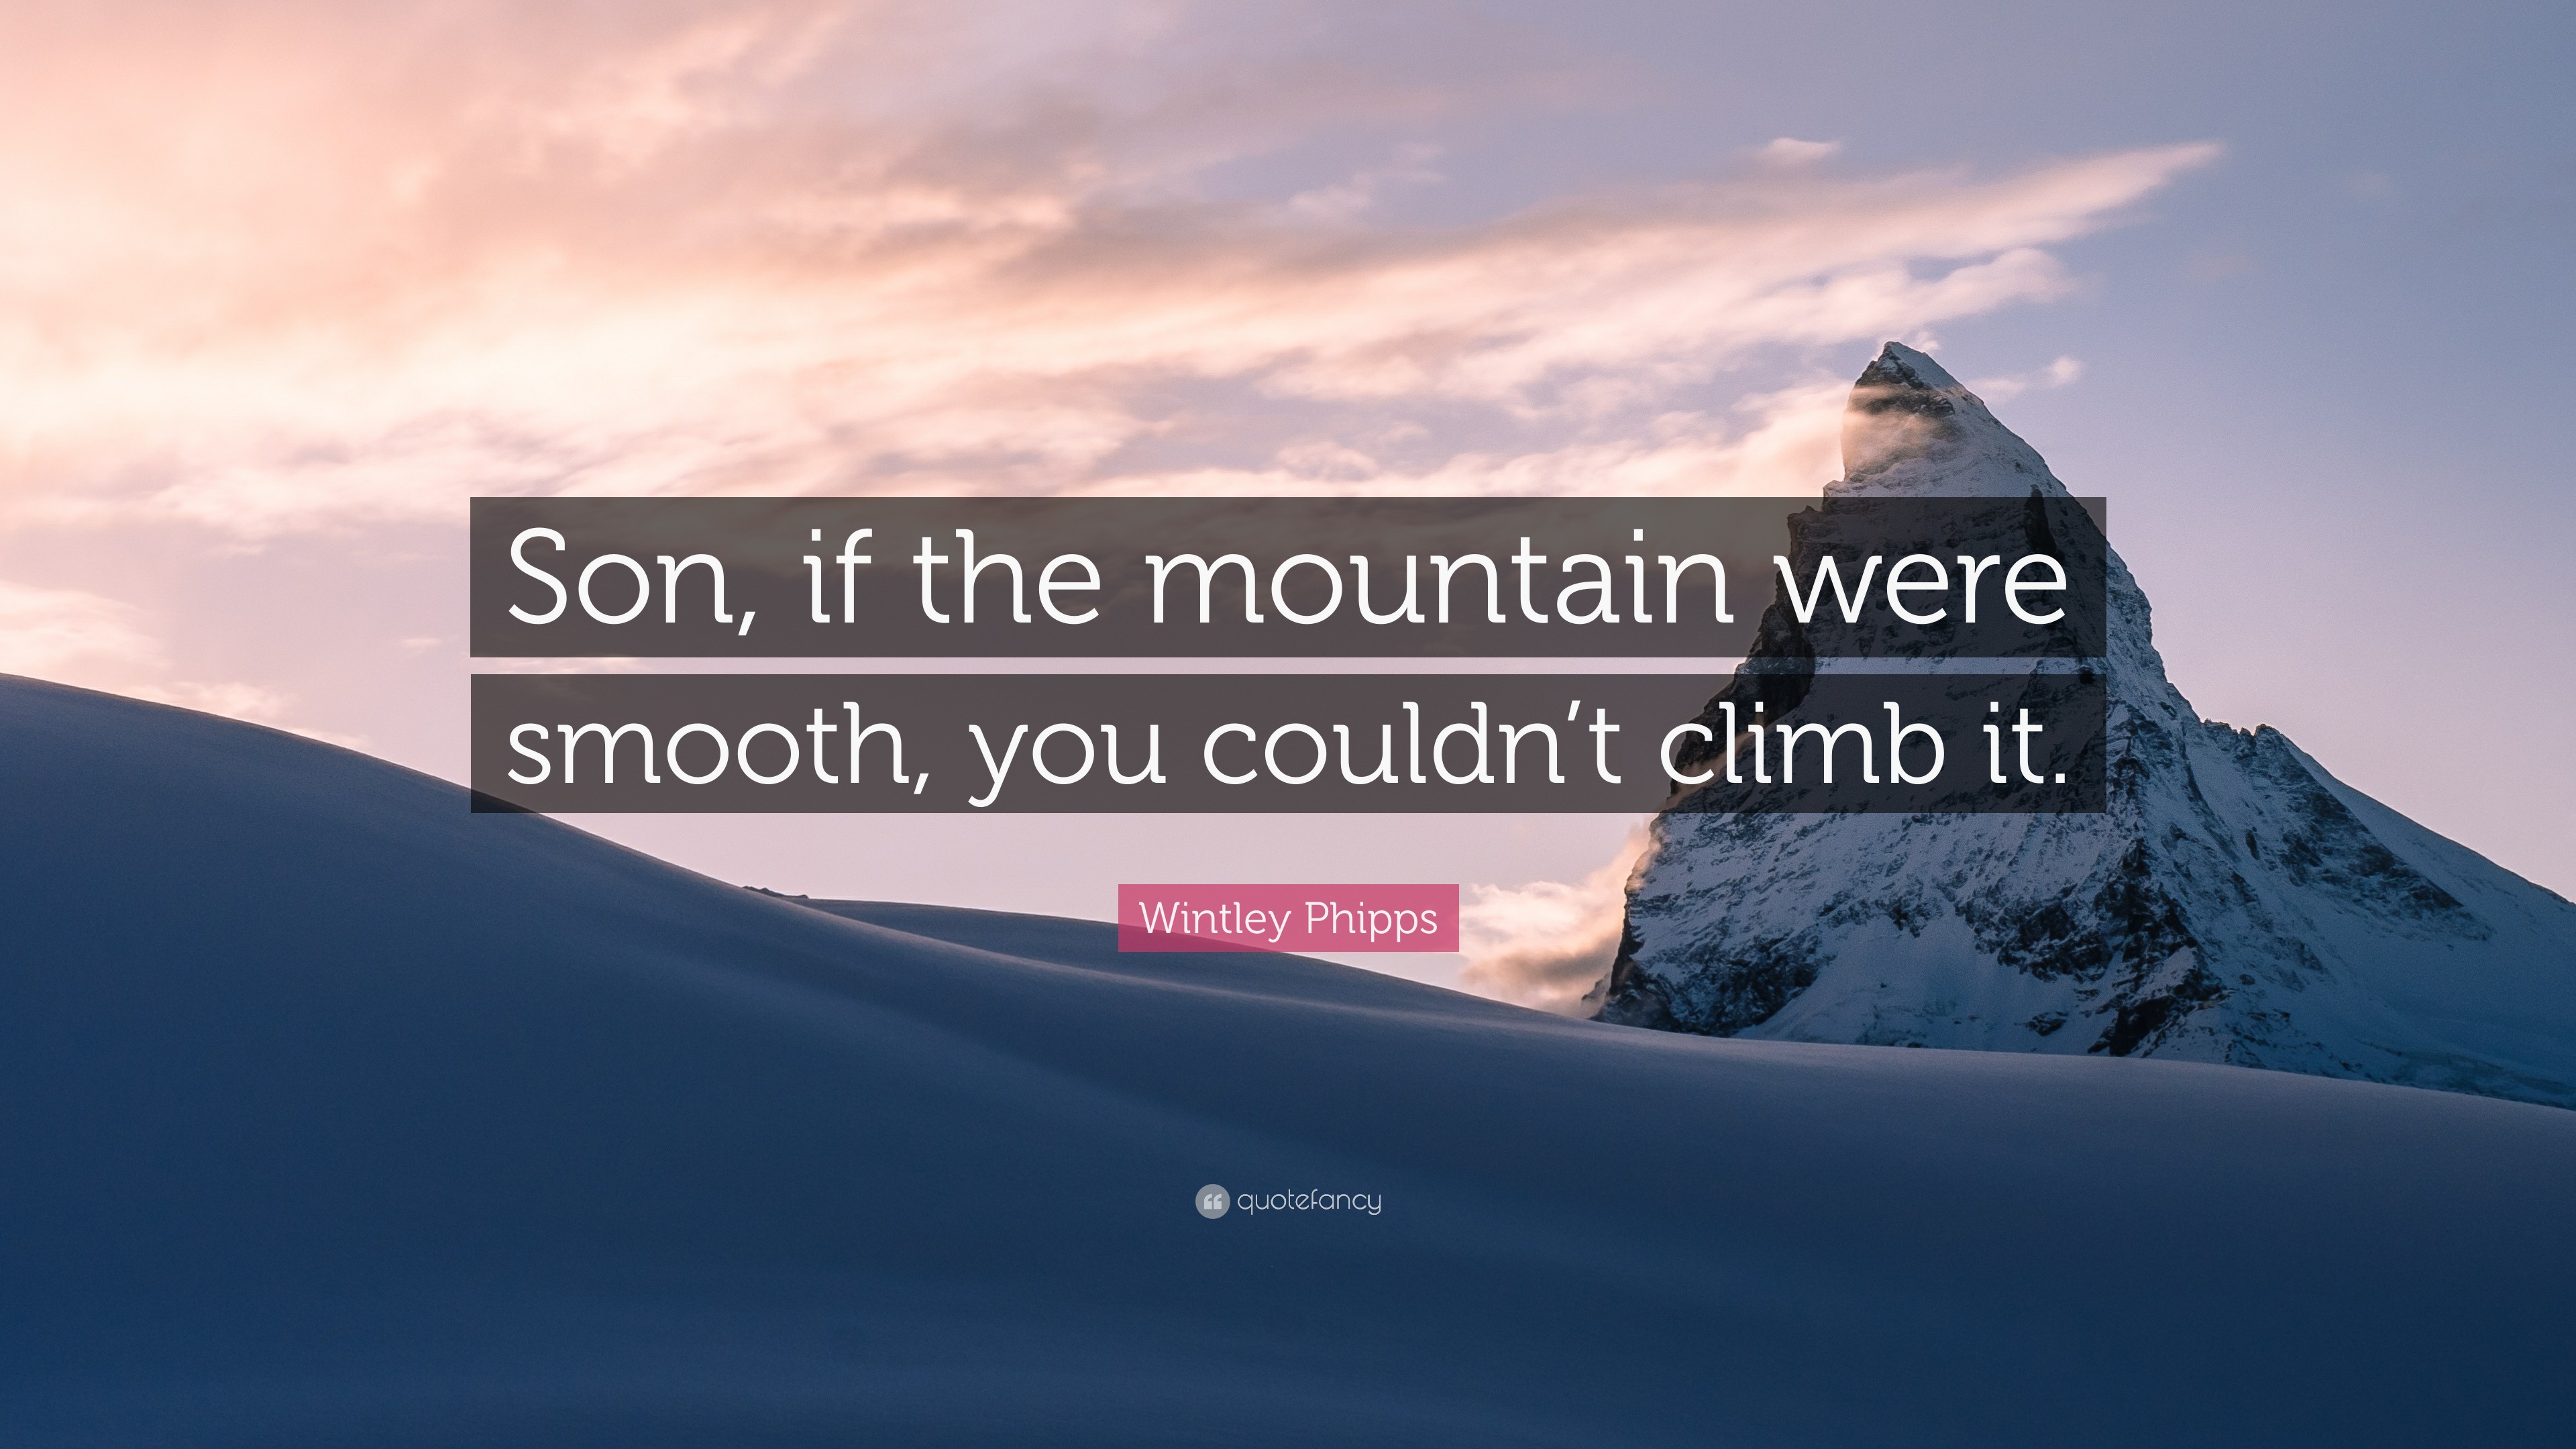 https://quotefancy.com/media/wallpaper/3840x2160/2442324-Wintley-Phipps-Quote-Son-if-the-mountain-were-smooth-you-couldn-t.jpg